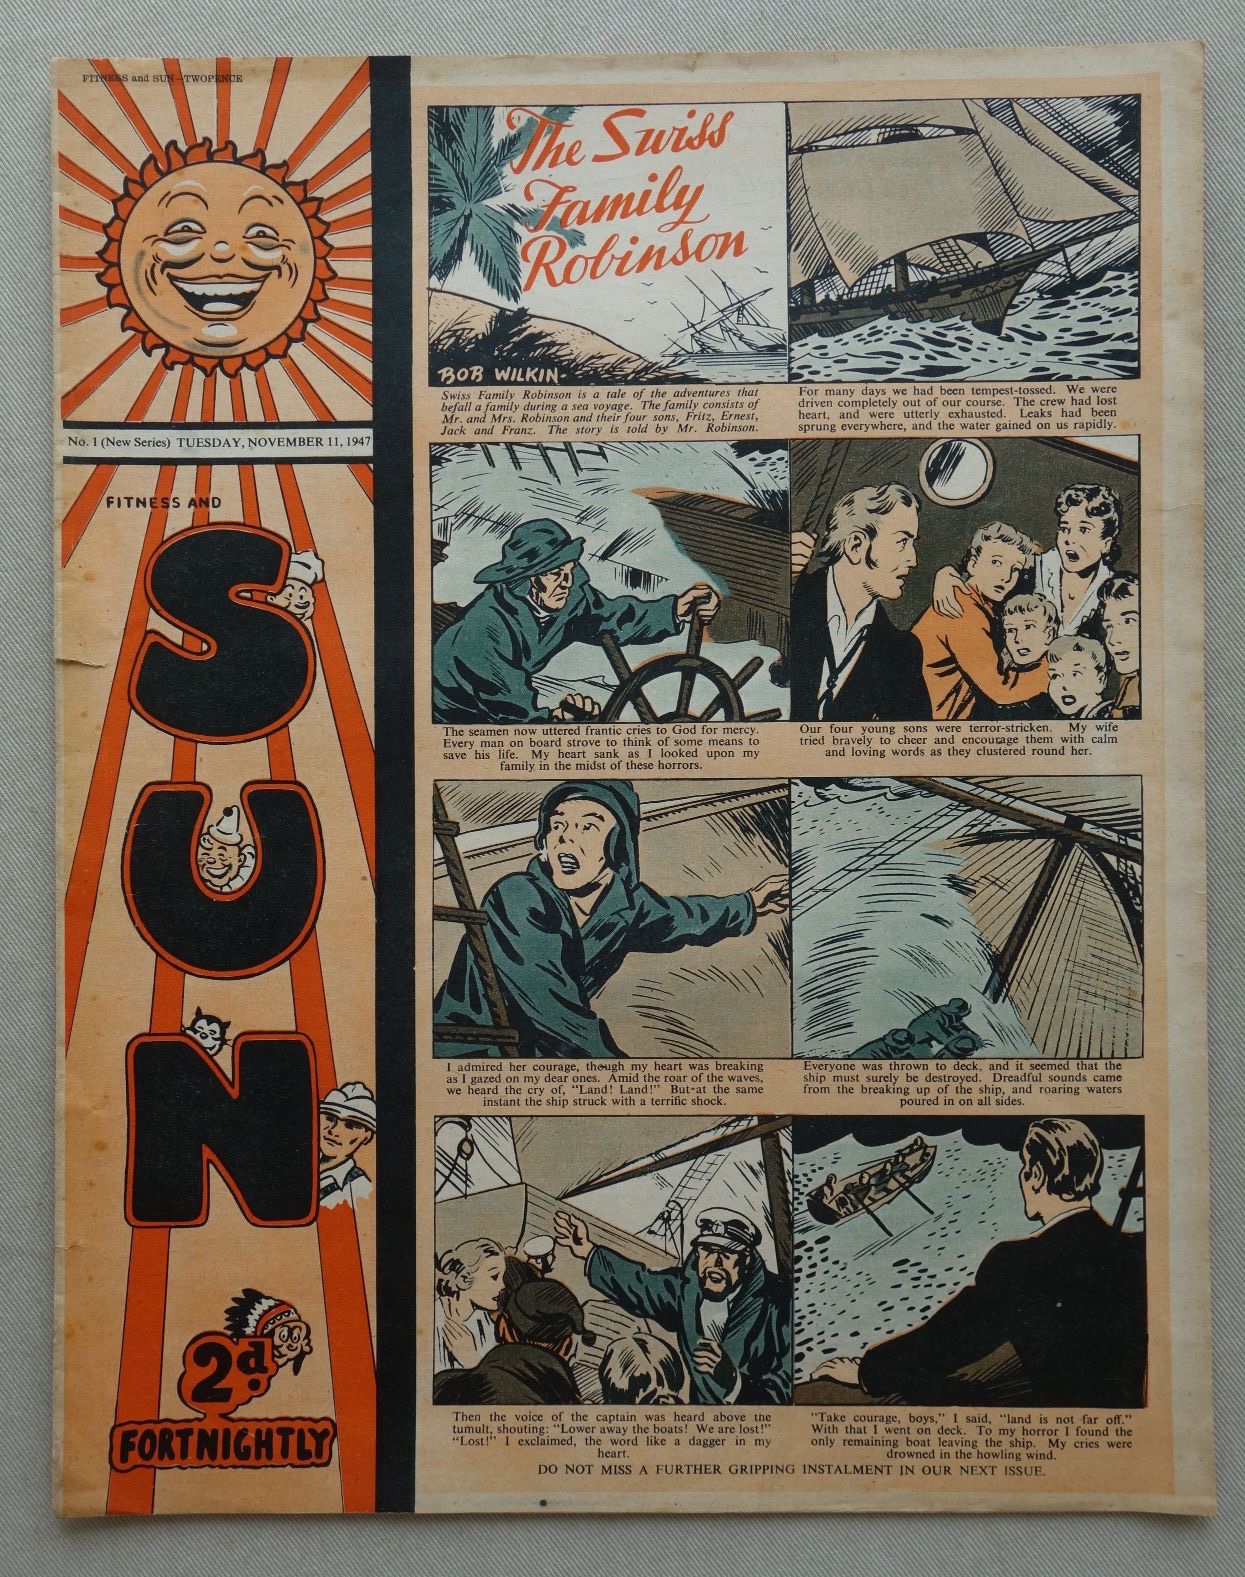 Sun No. 1 - cover dated 11th November 1947